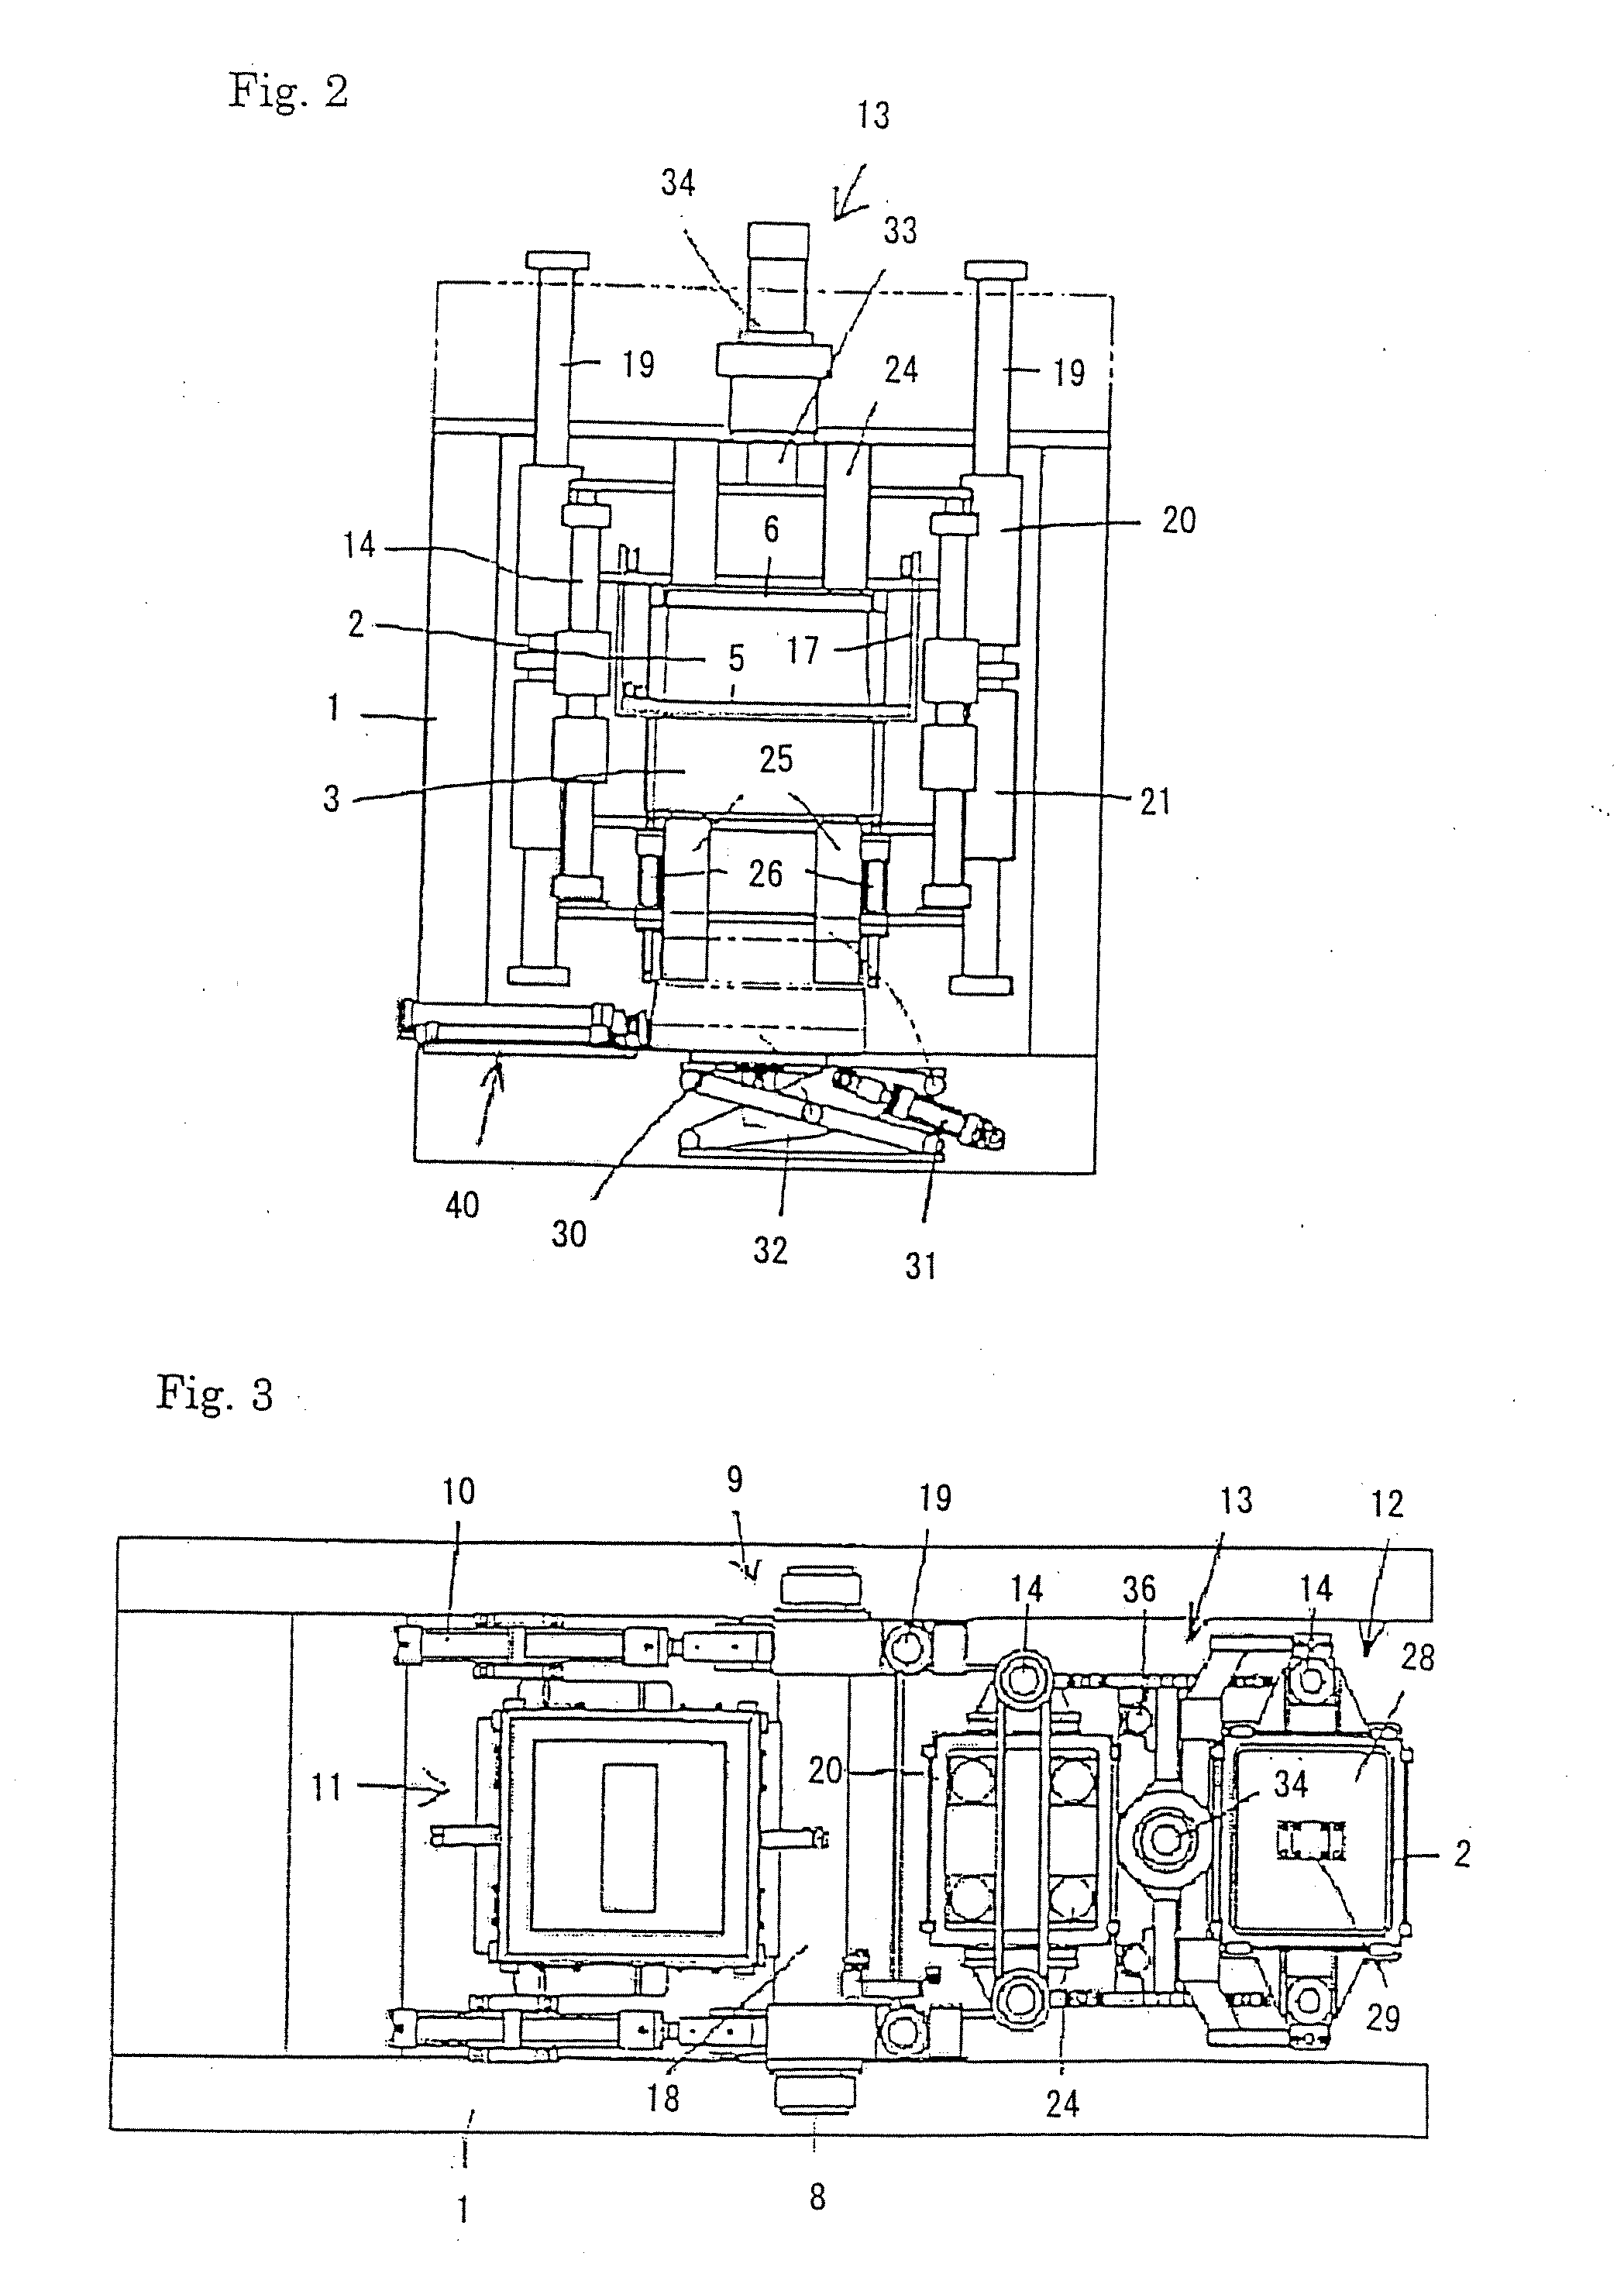 Method for making flaskless upper and lower molds, an apparatus therefor, and a method for placing a core